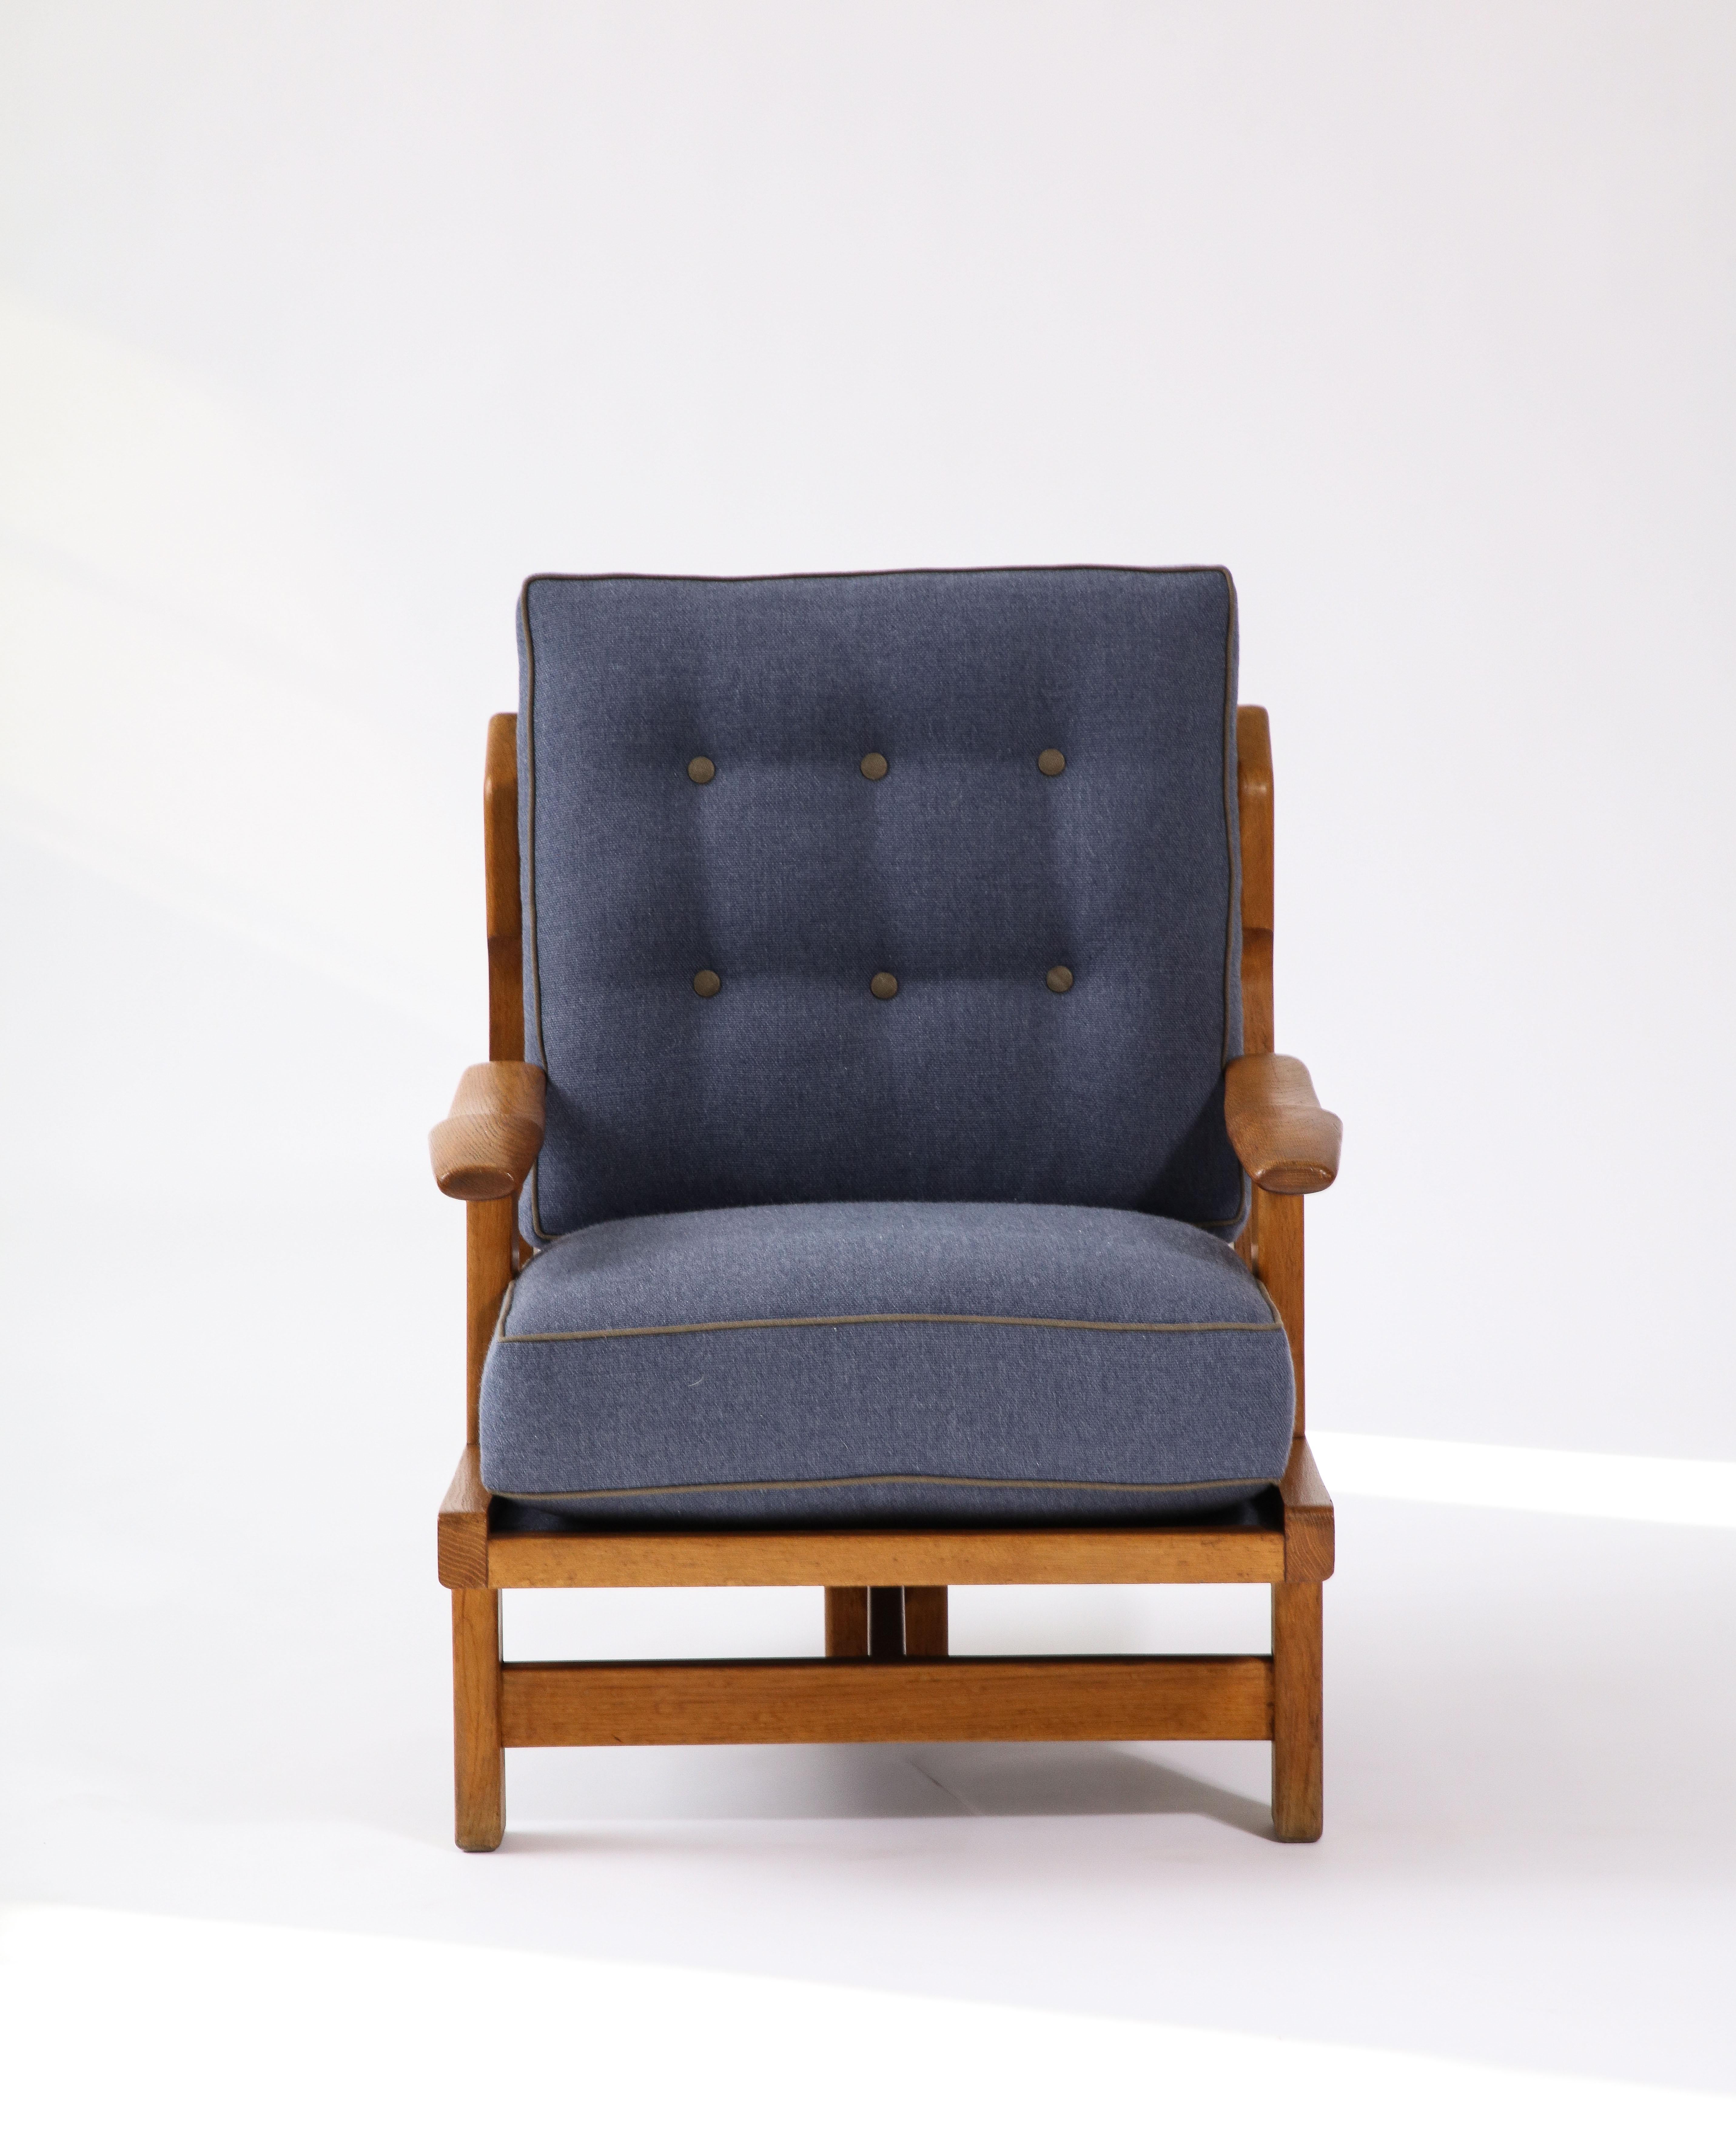 Two available; priced individually. 

Rare tripod sculptural lounge chair by Guillerme et Chambron. This chair is incredibly comfortable, with new cushions upholstered in navy linen with contrasting olive piping and buttons.